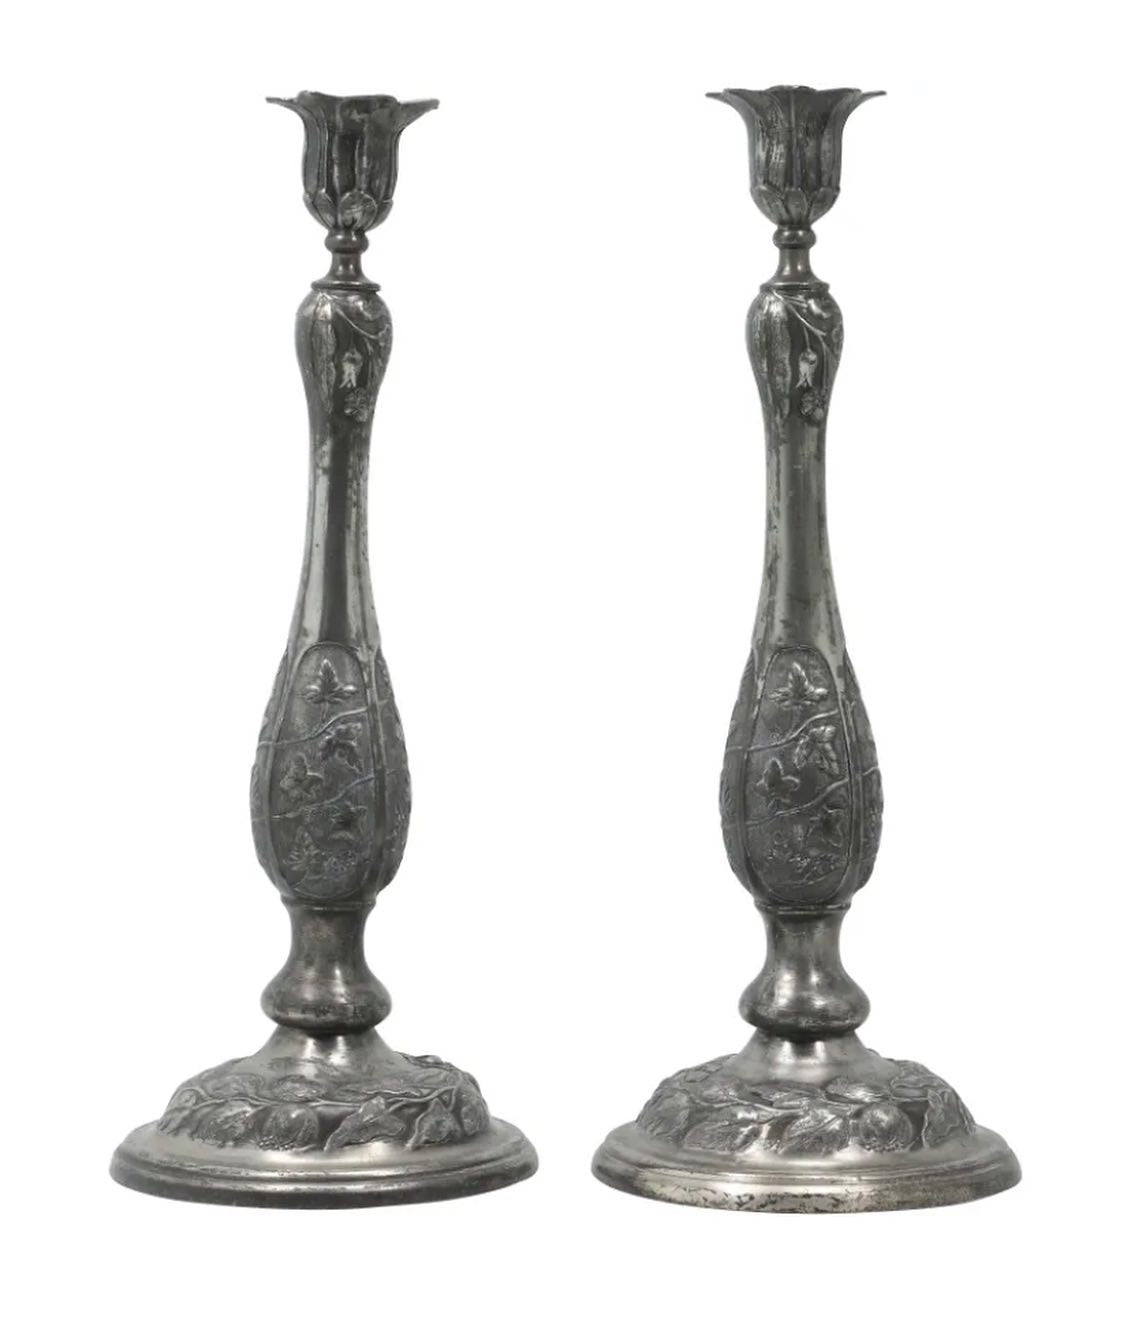 19th Century French Art Nouveau Flowers Silver Plate Candlesticks.